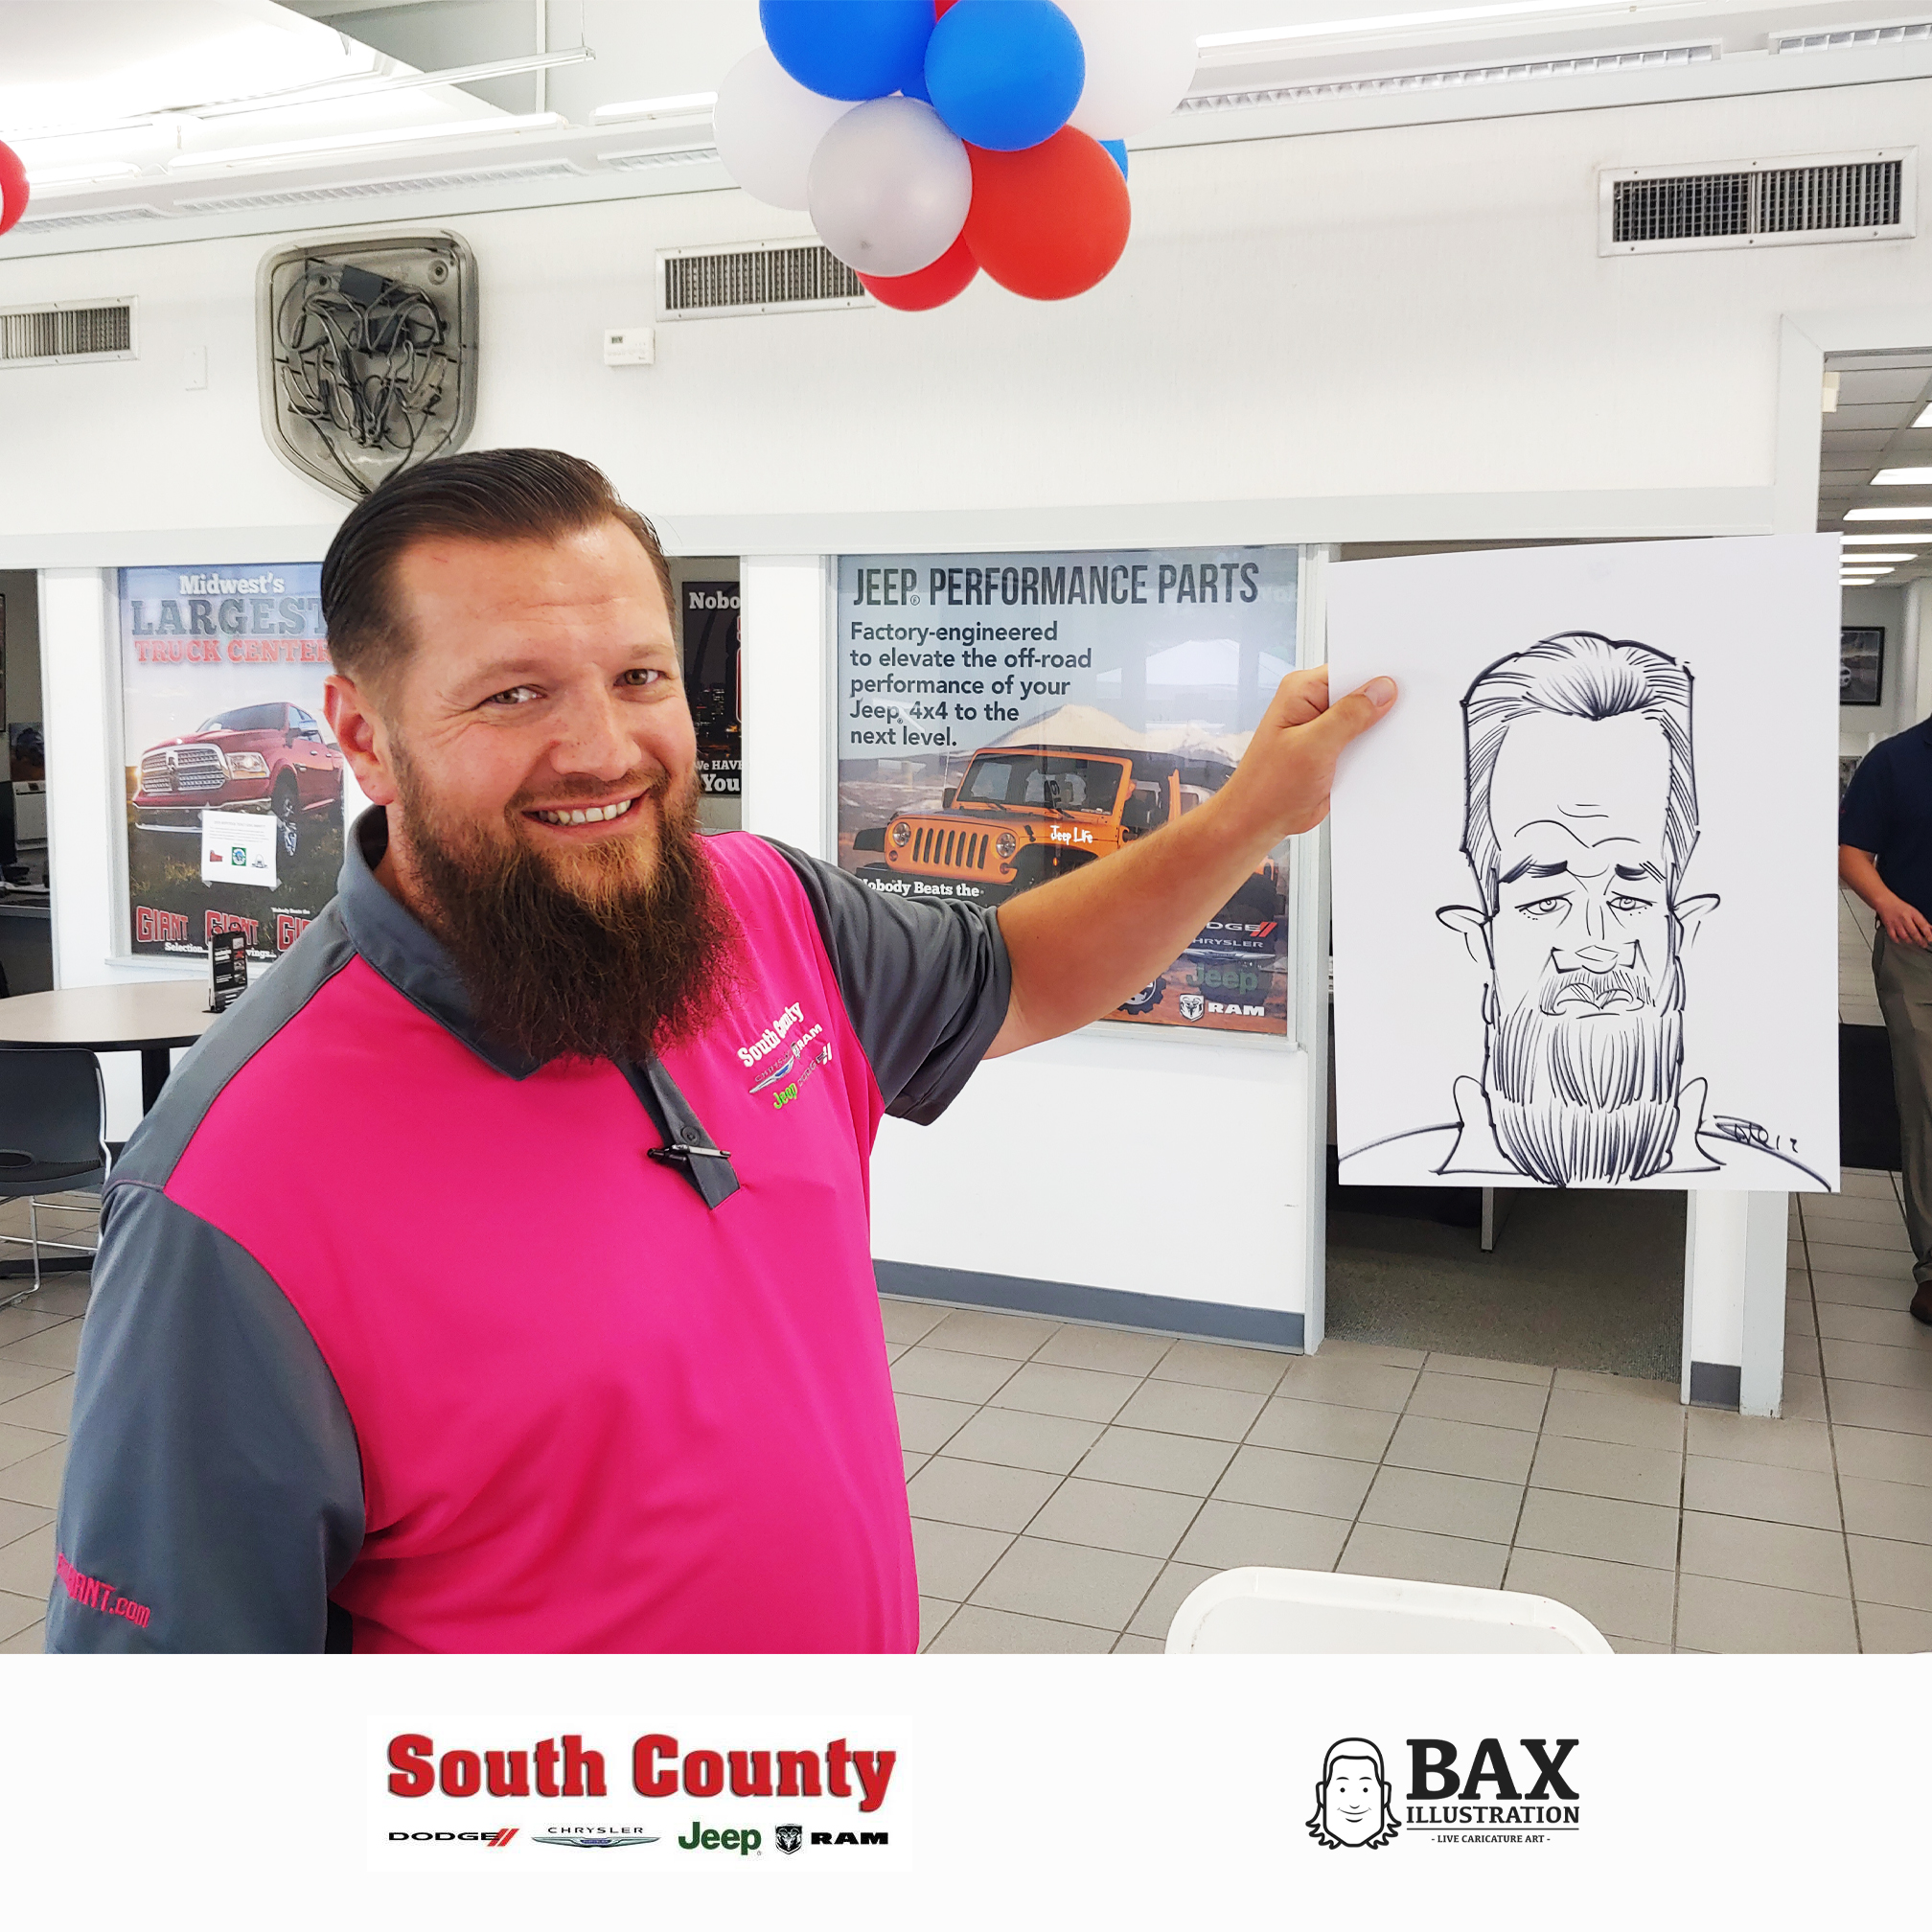 Guy holding caricature by Bax Illustration at South County Dodge Customer Appreciation Event in St. Louis